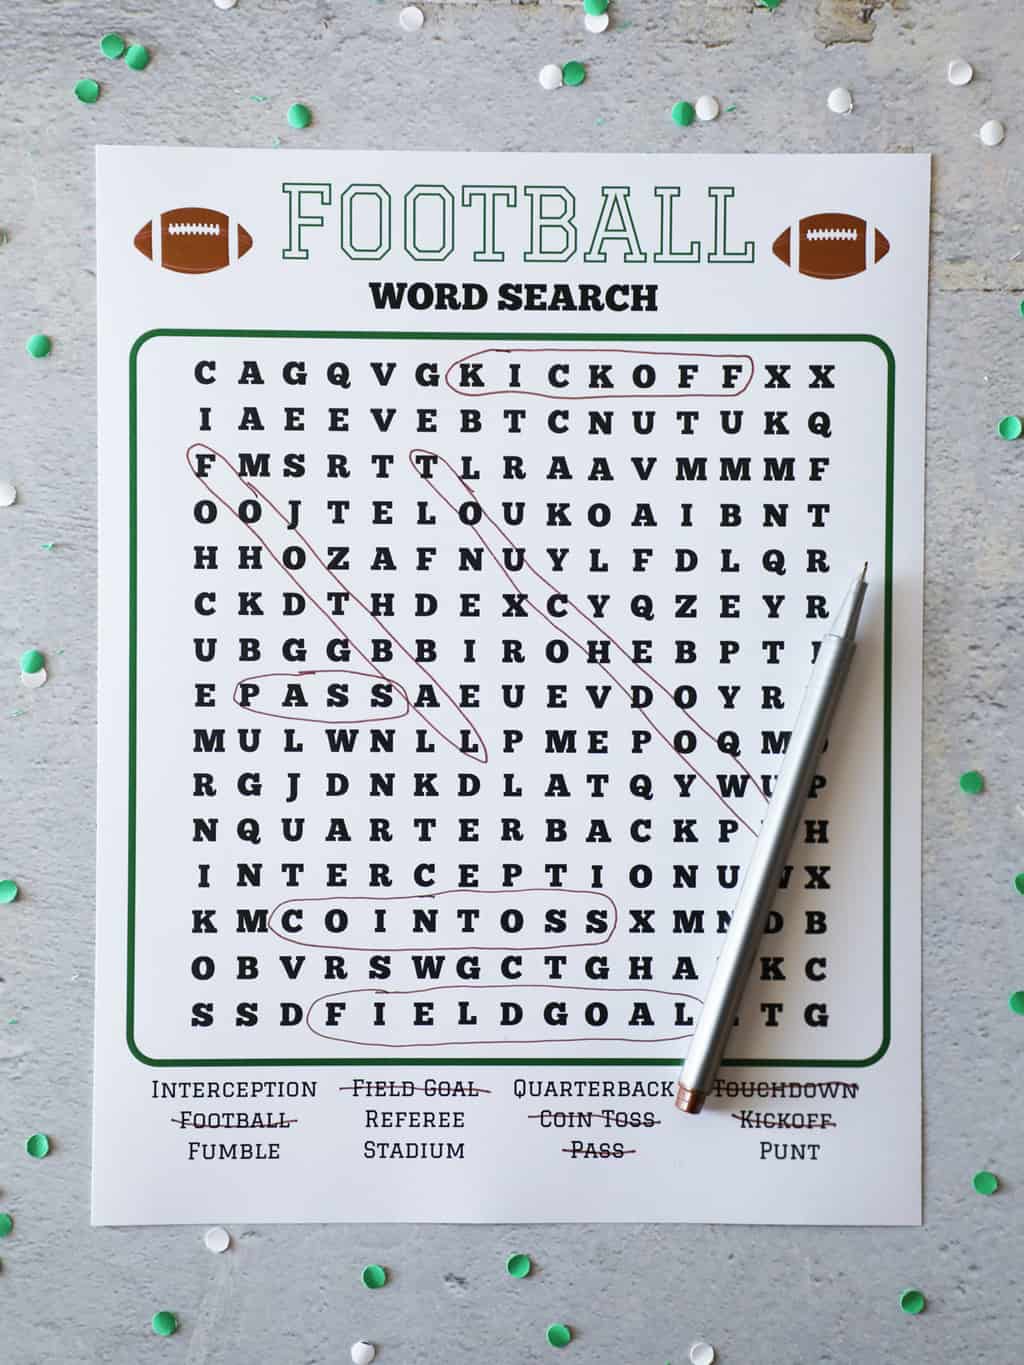 football word search with a pen on top surrounded by green and white confetti